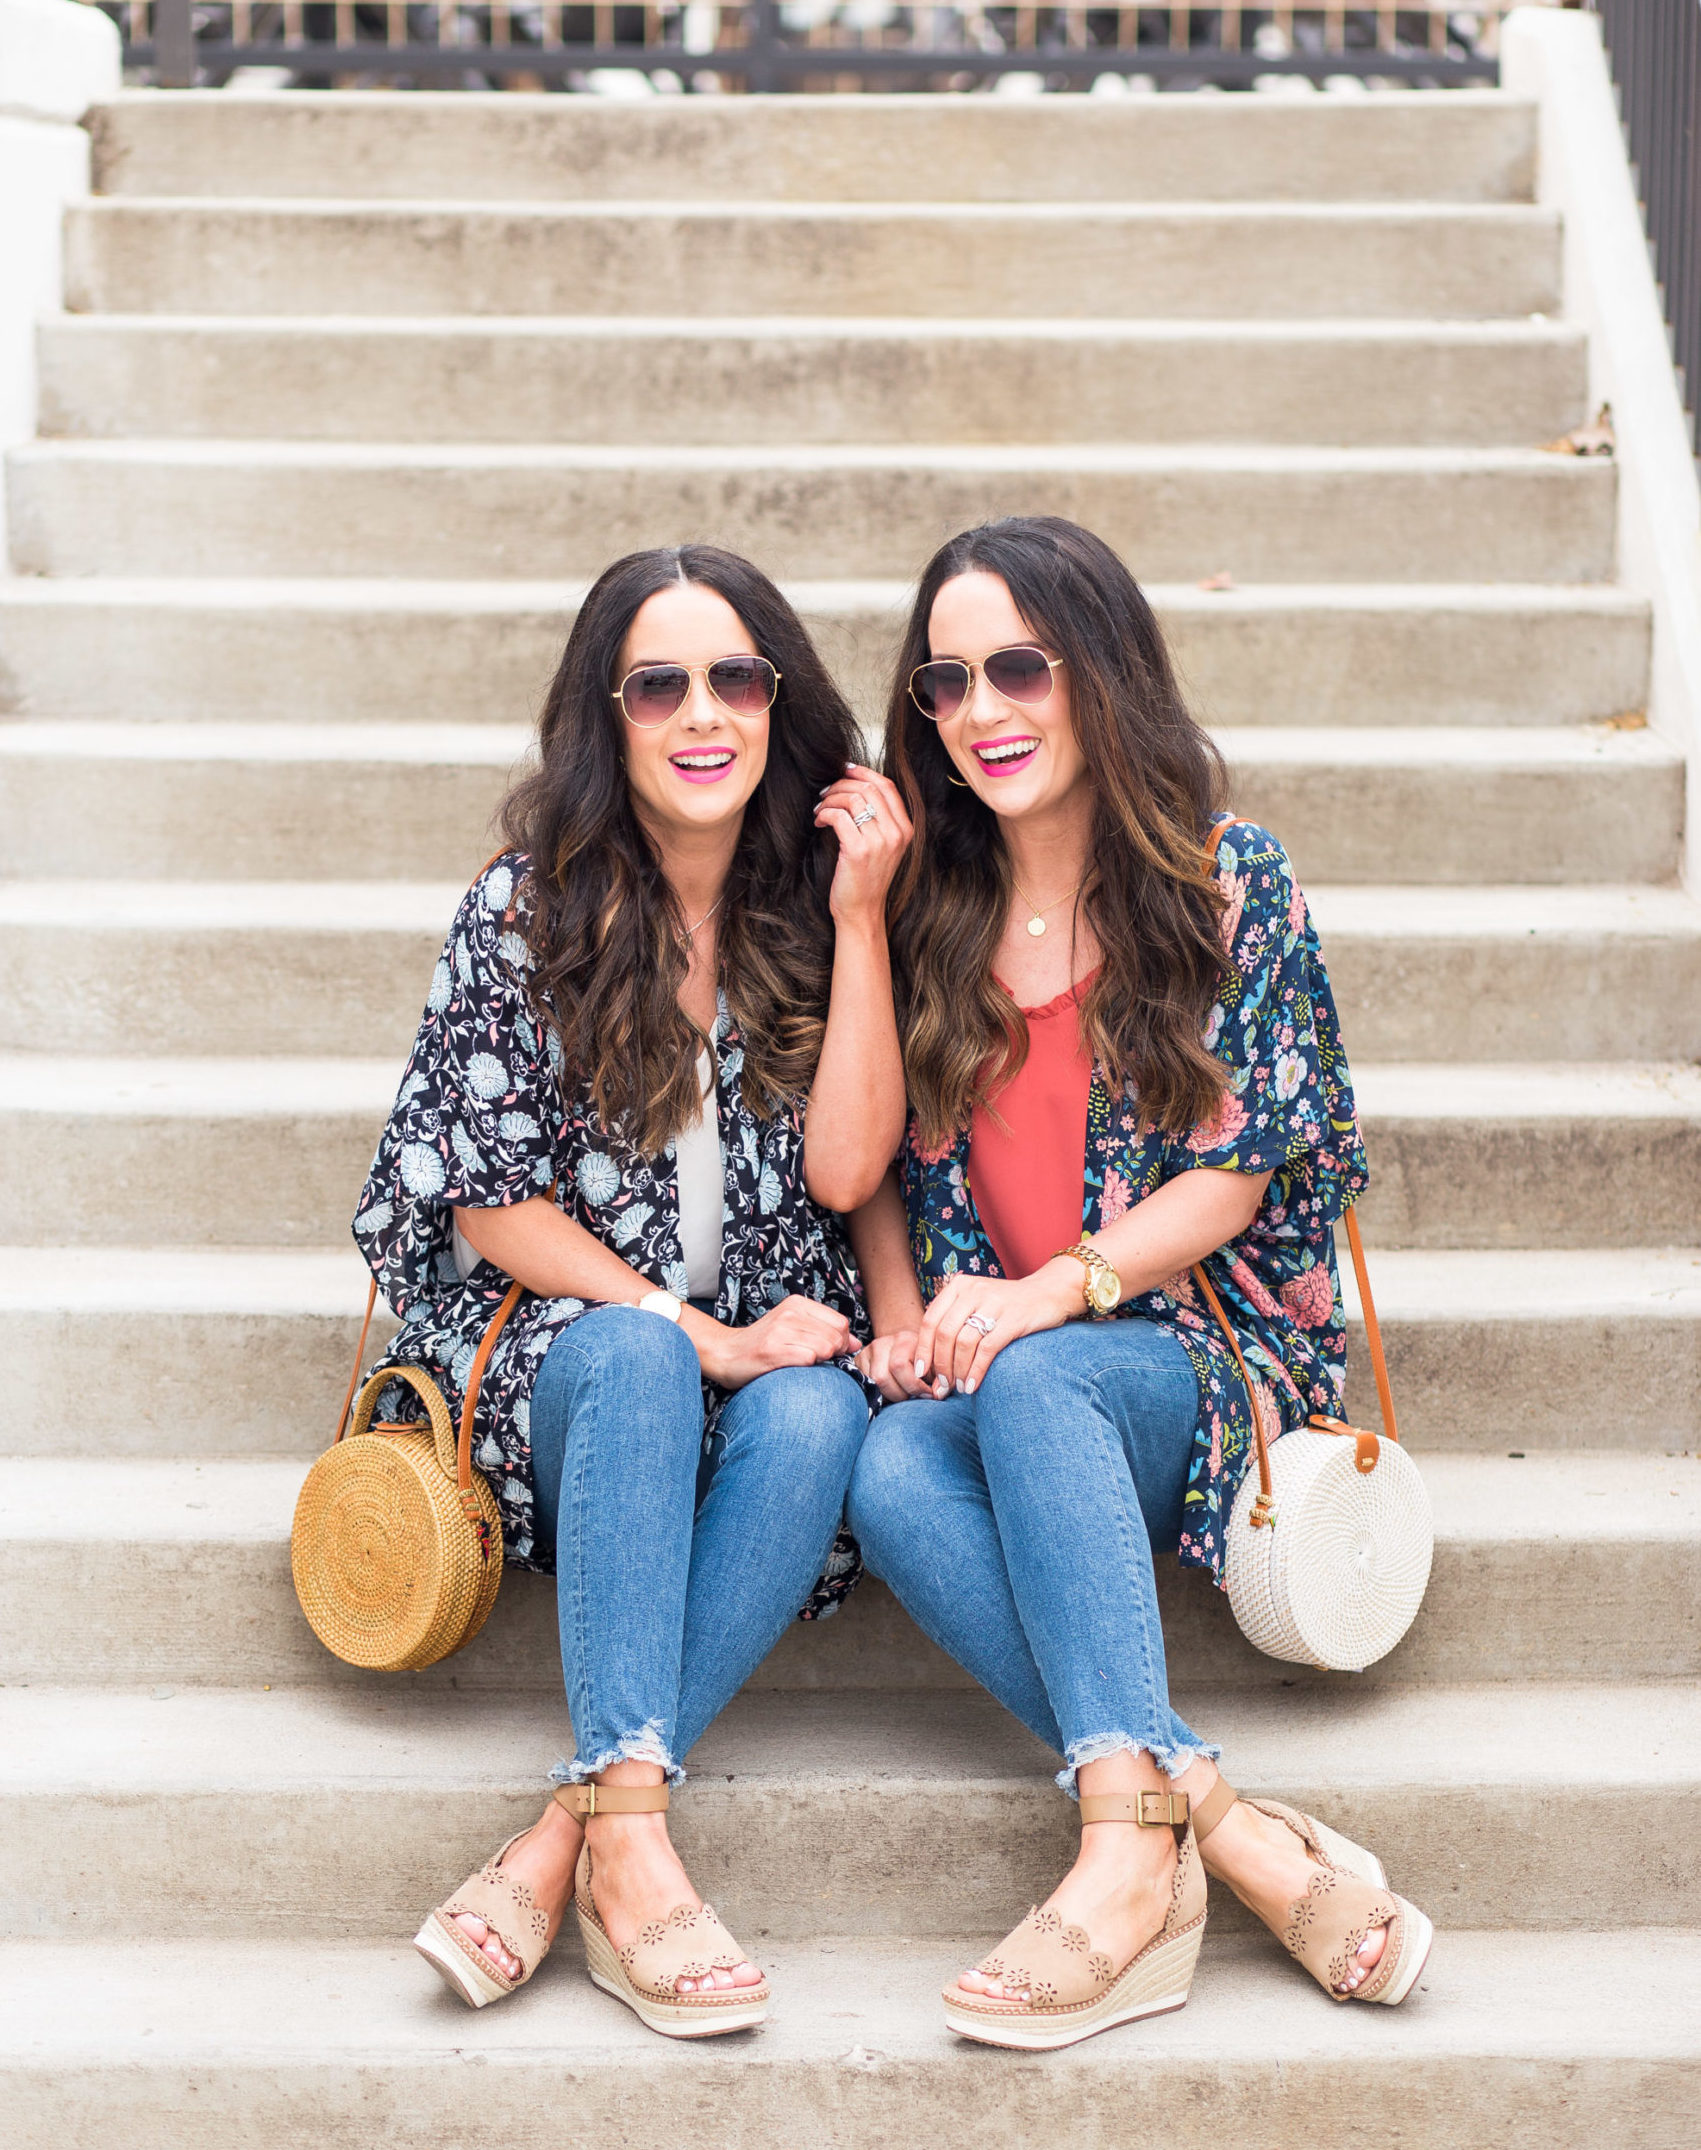 The Best New DSW Shoes + Exclusive Promo Code! - The Double Take Girls